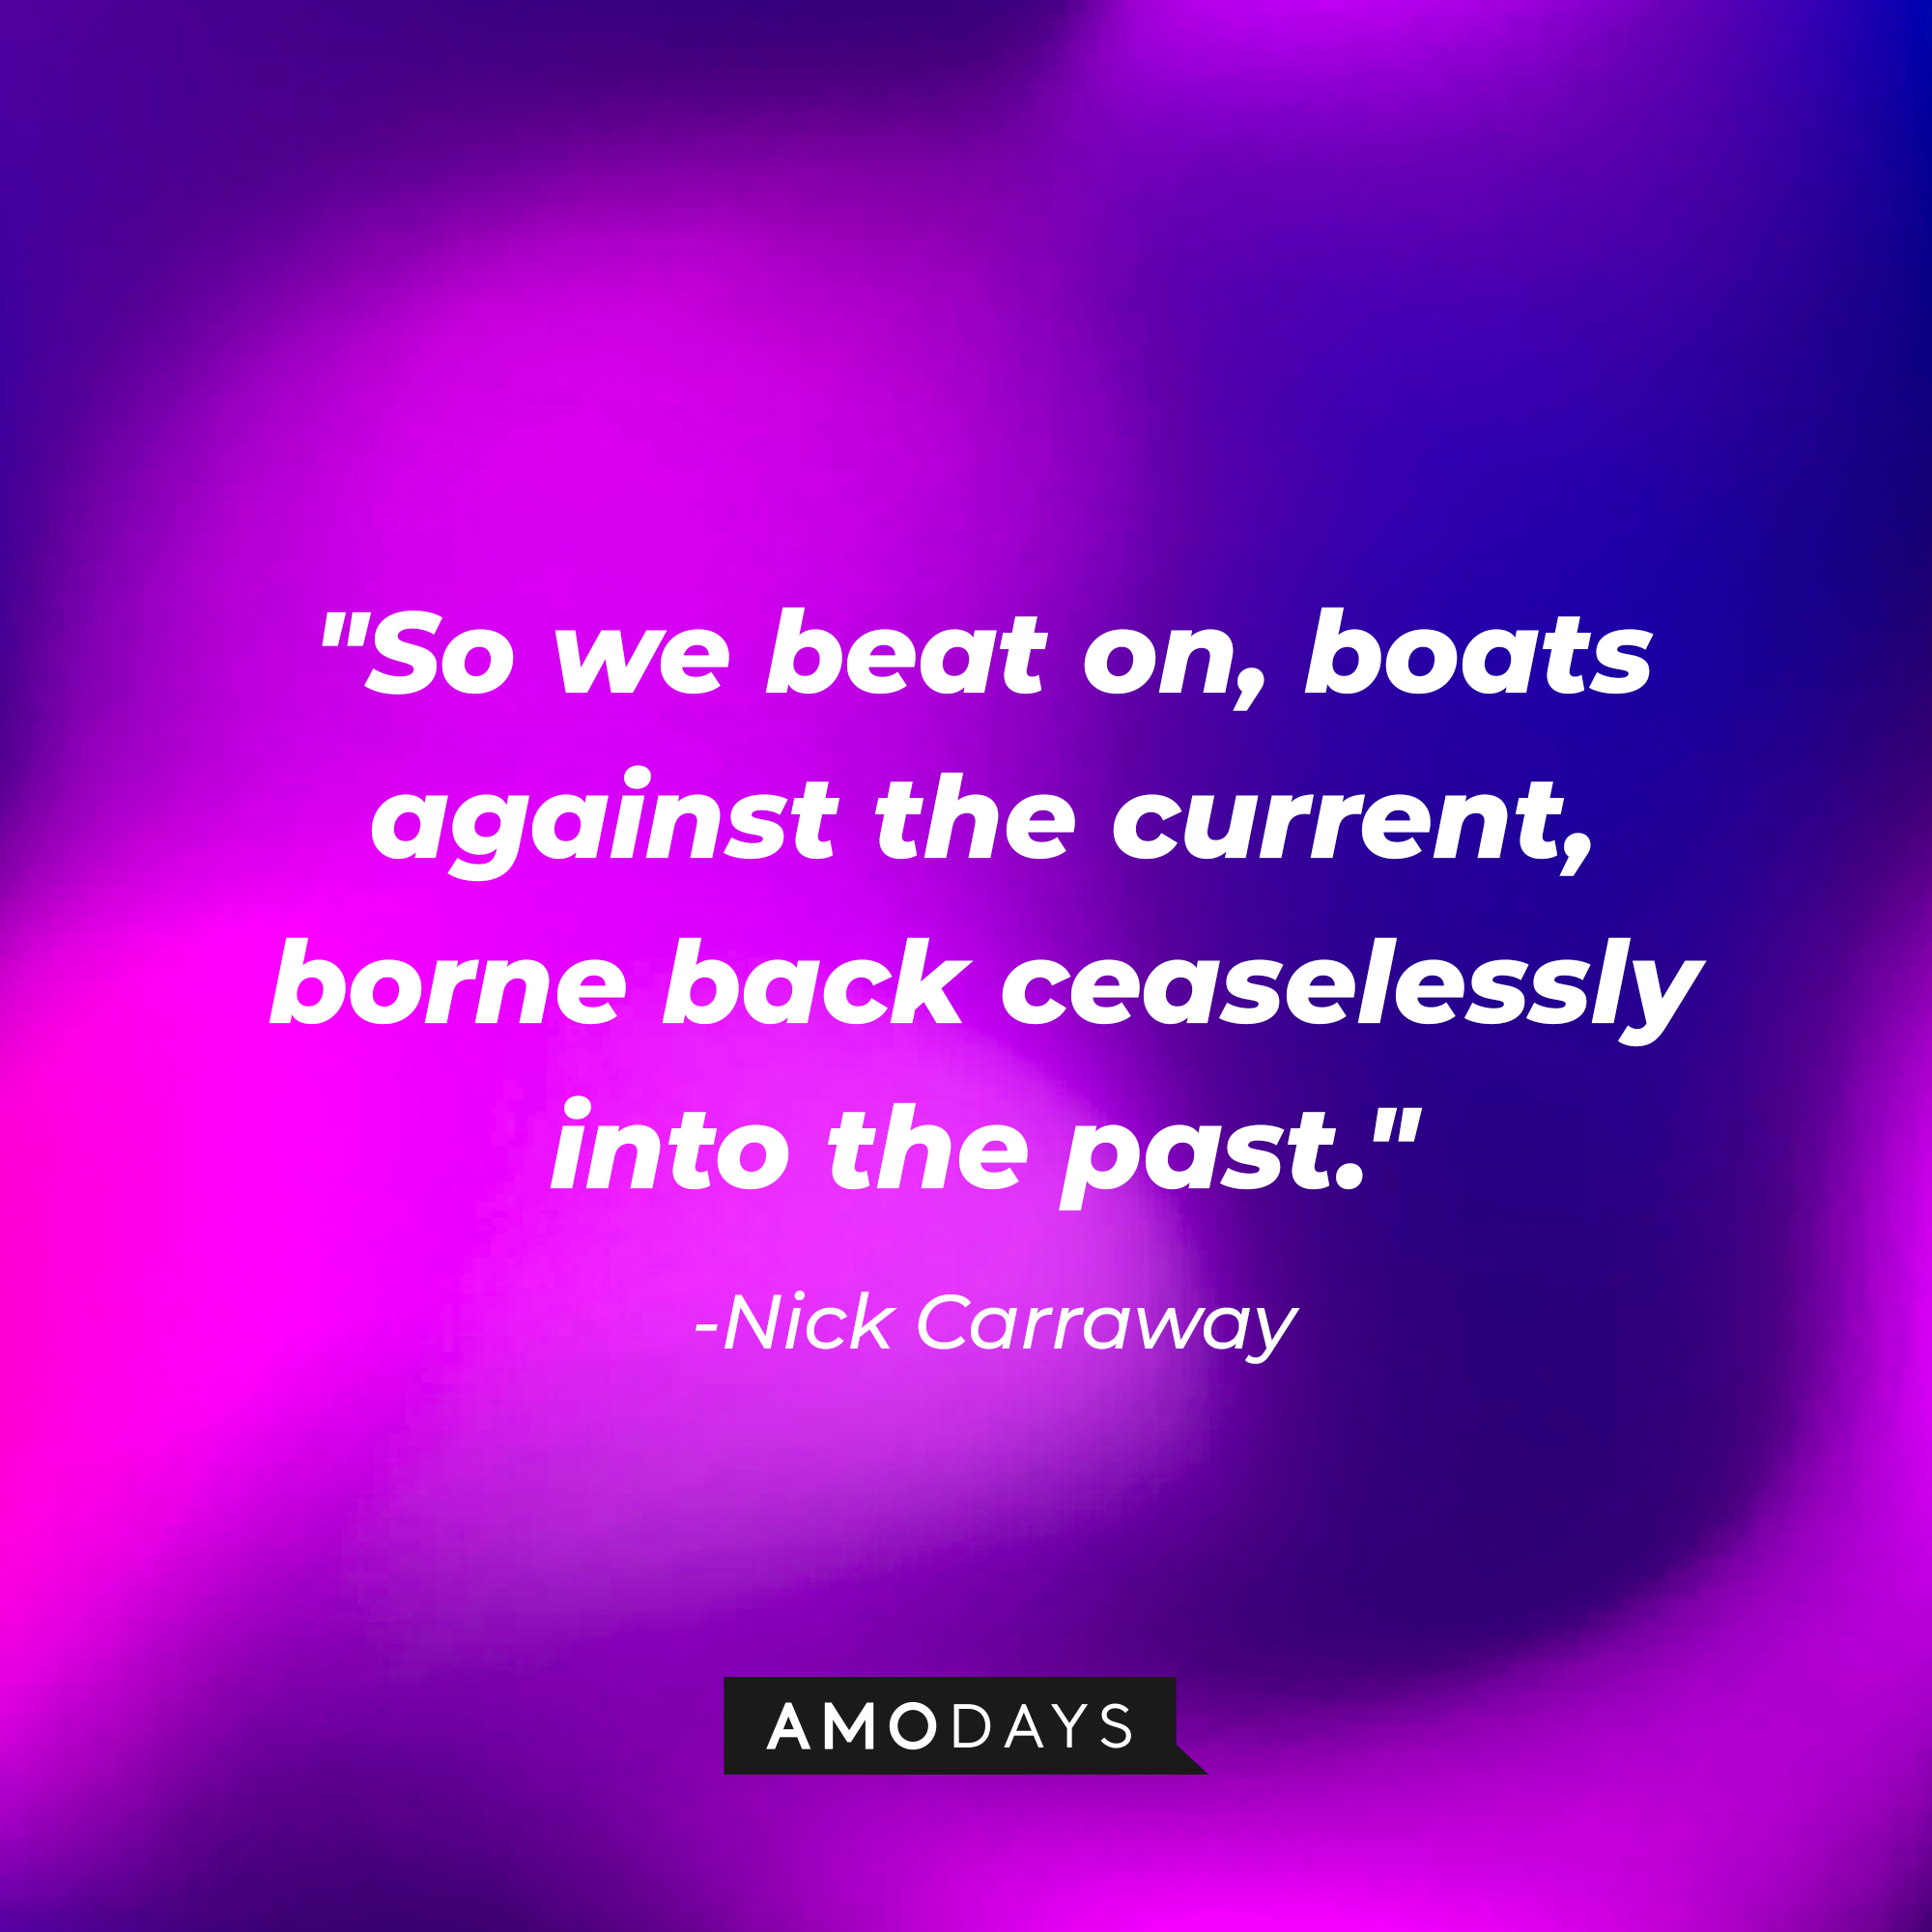 Nick Carraway's quote, "So we beat on, boats against the current, borne back ceaselessly into the past." | Source: Amodays